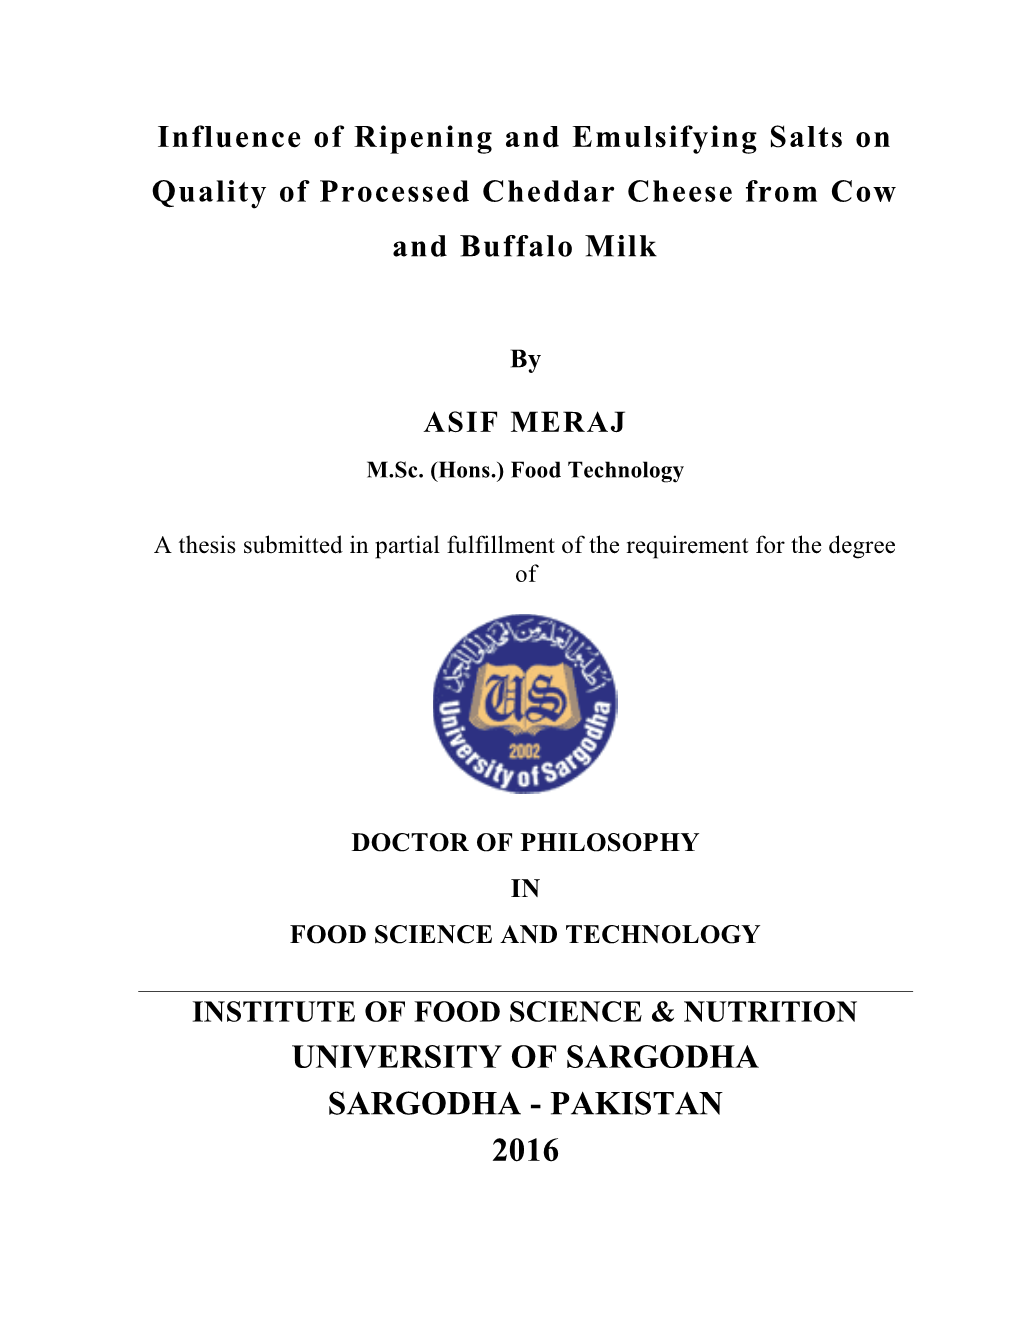 Influence of Ripening and Emulsifying Salts on Quality of Processed Cheddar Cheese from Cow and Buffalo Milk